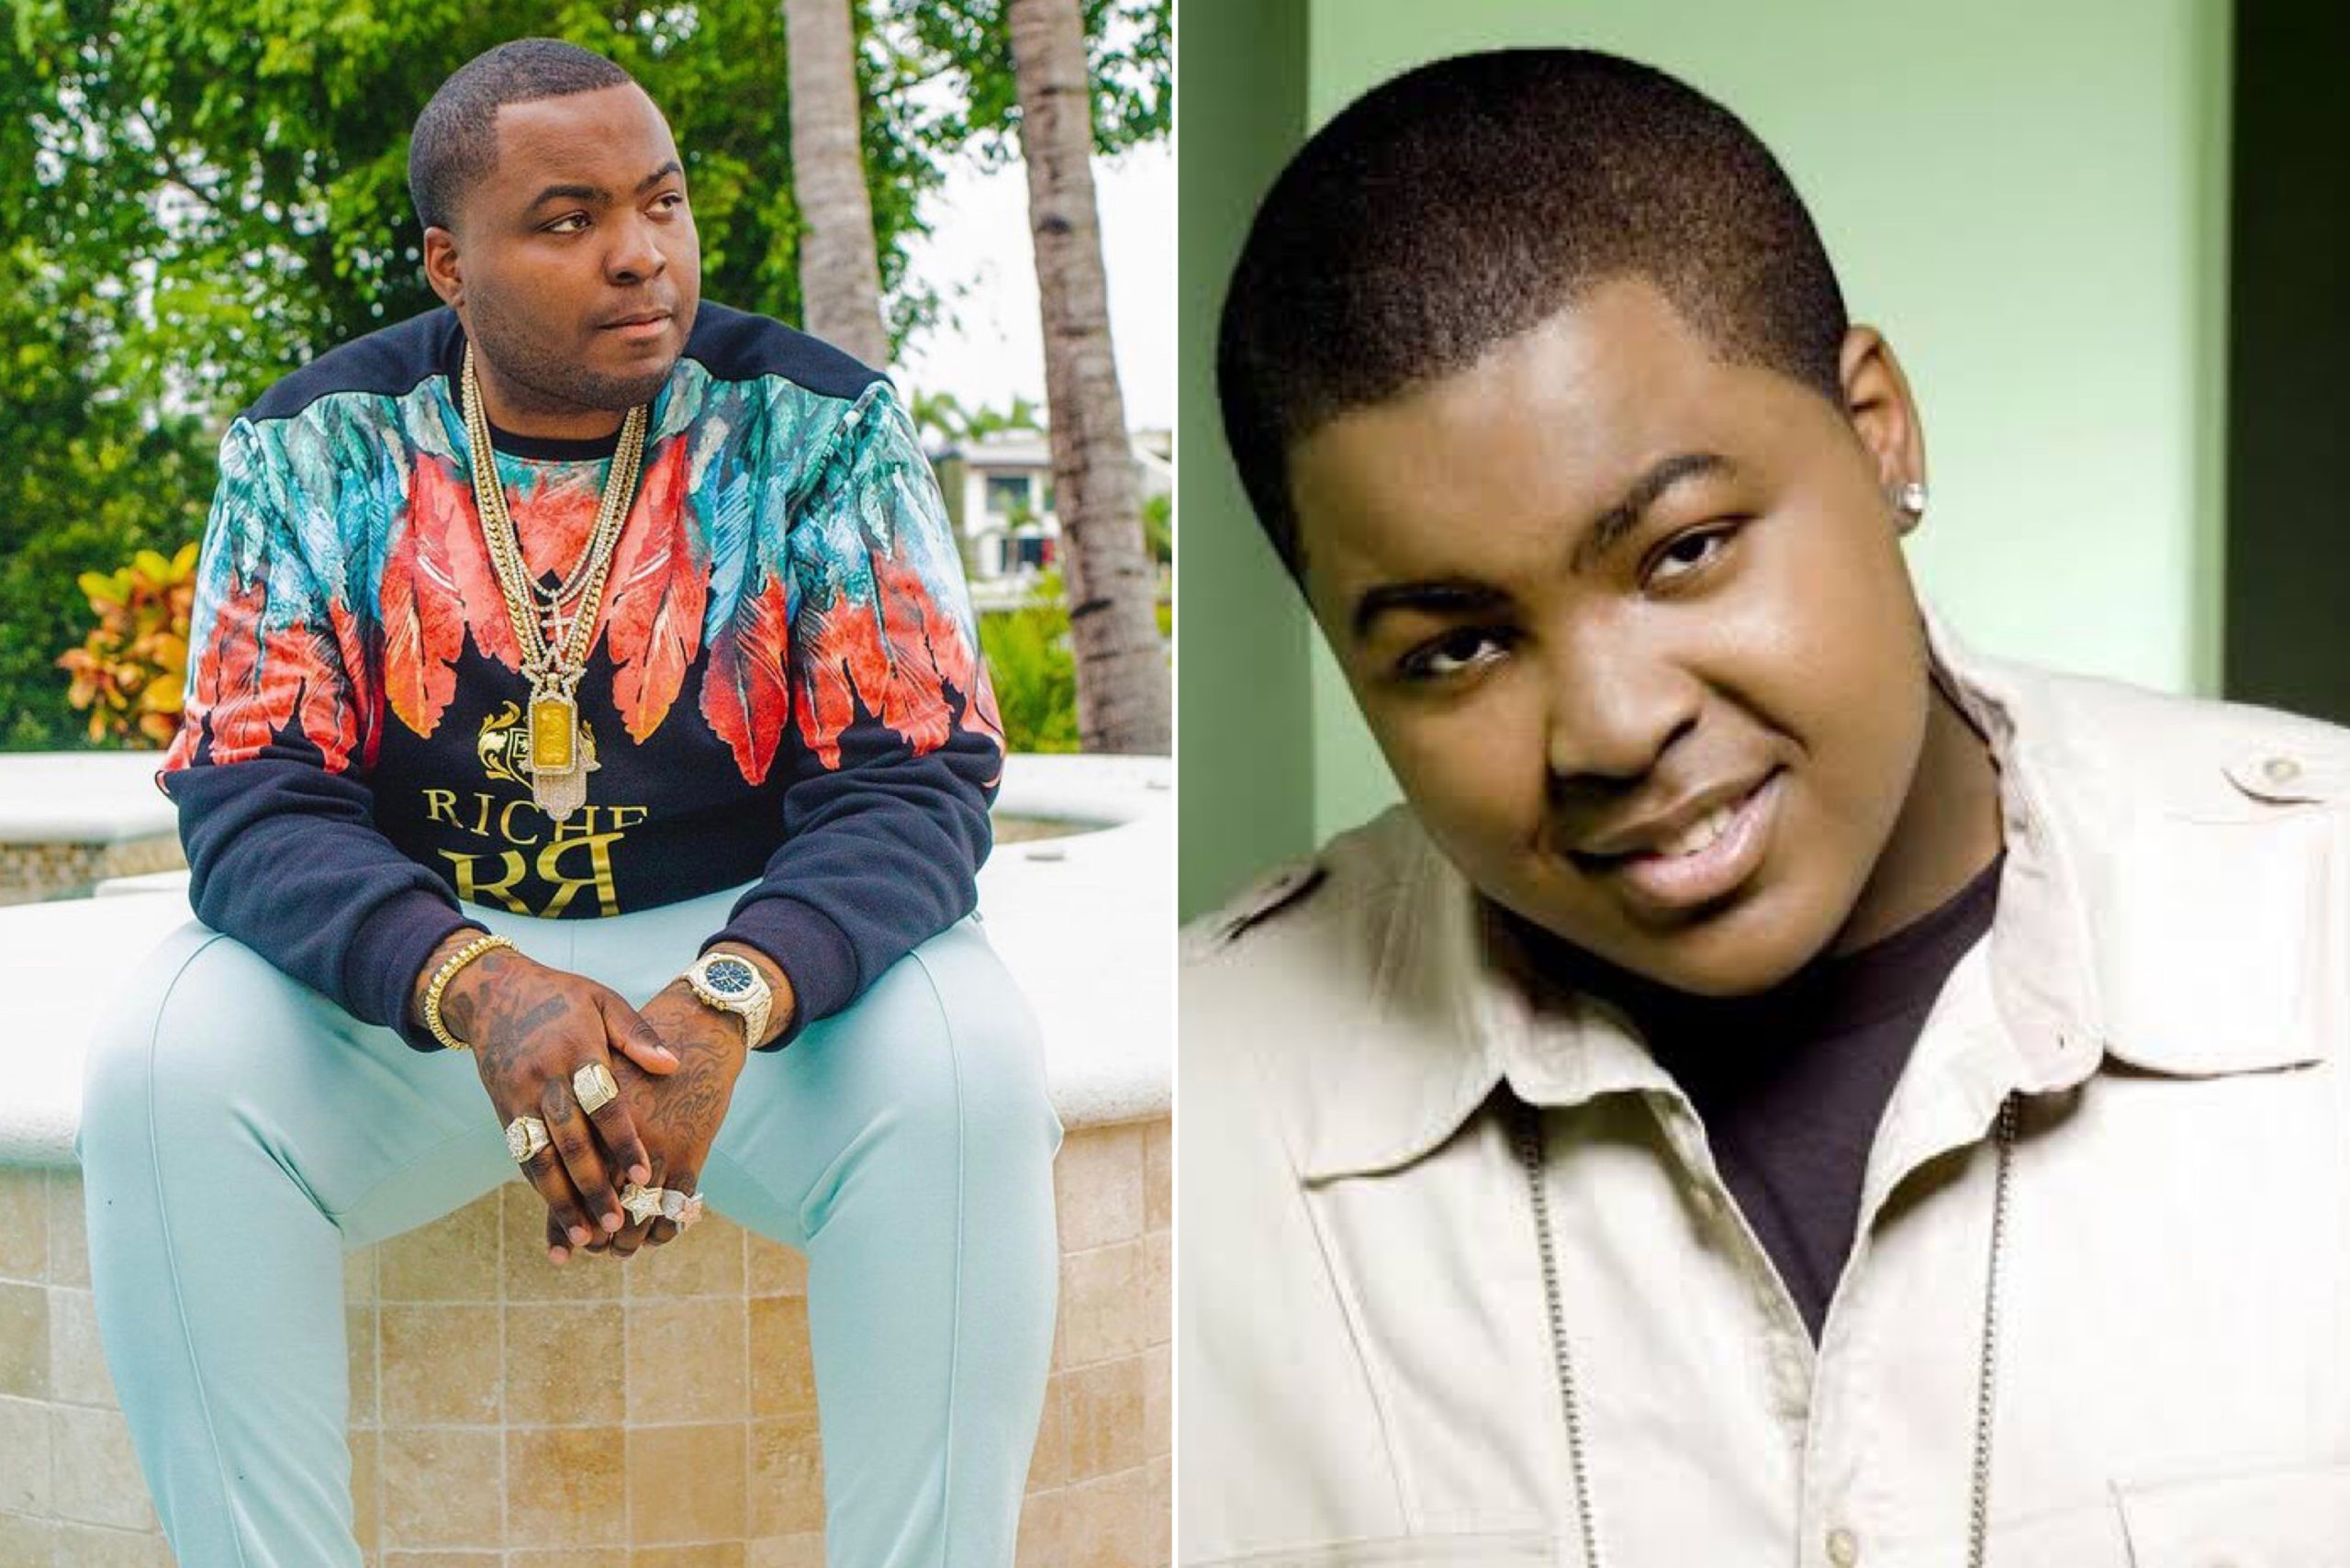 Unpaid Jewellery: Rapper Sean Kingston Charged With Grand Theft, Arrest Warrant Issued